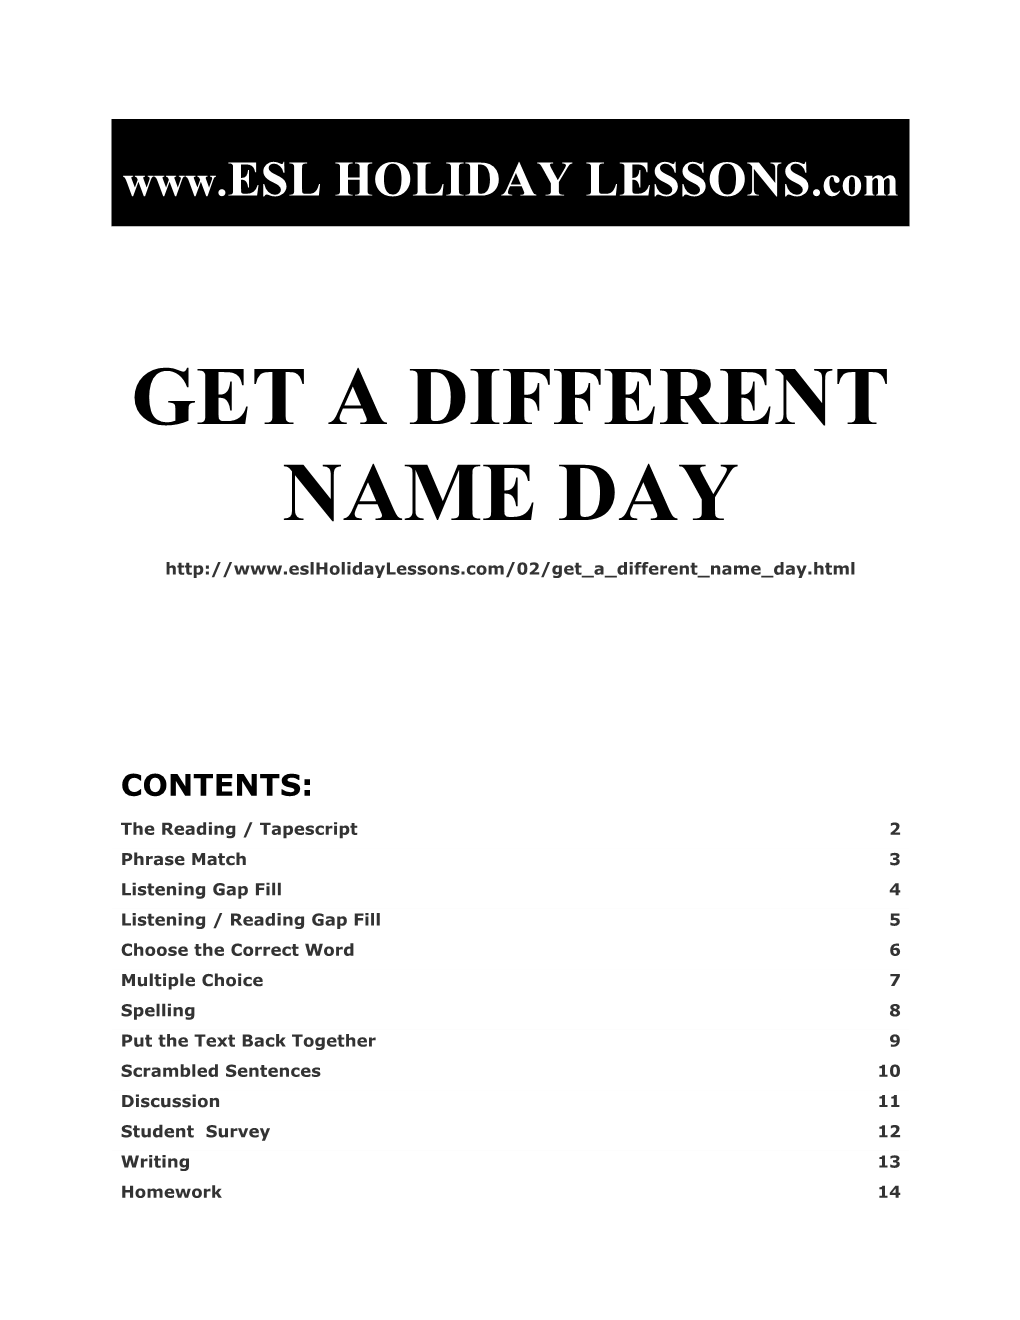 Holiday Lessons - Get a Different Name Day